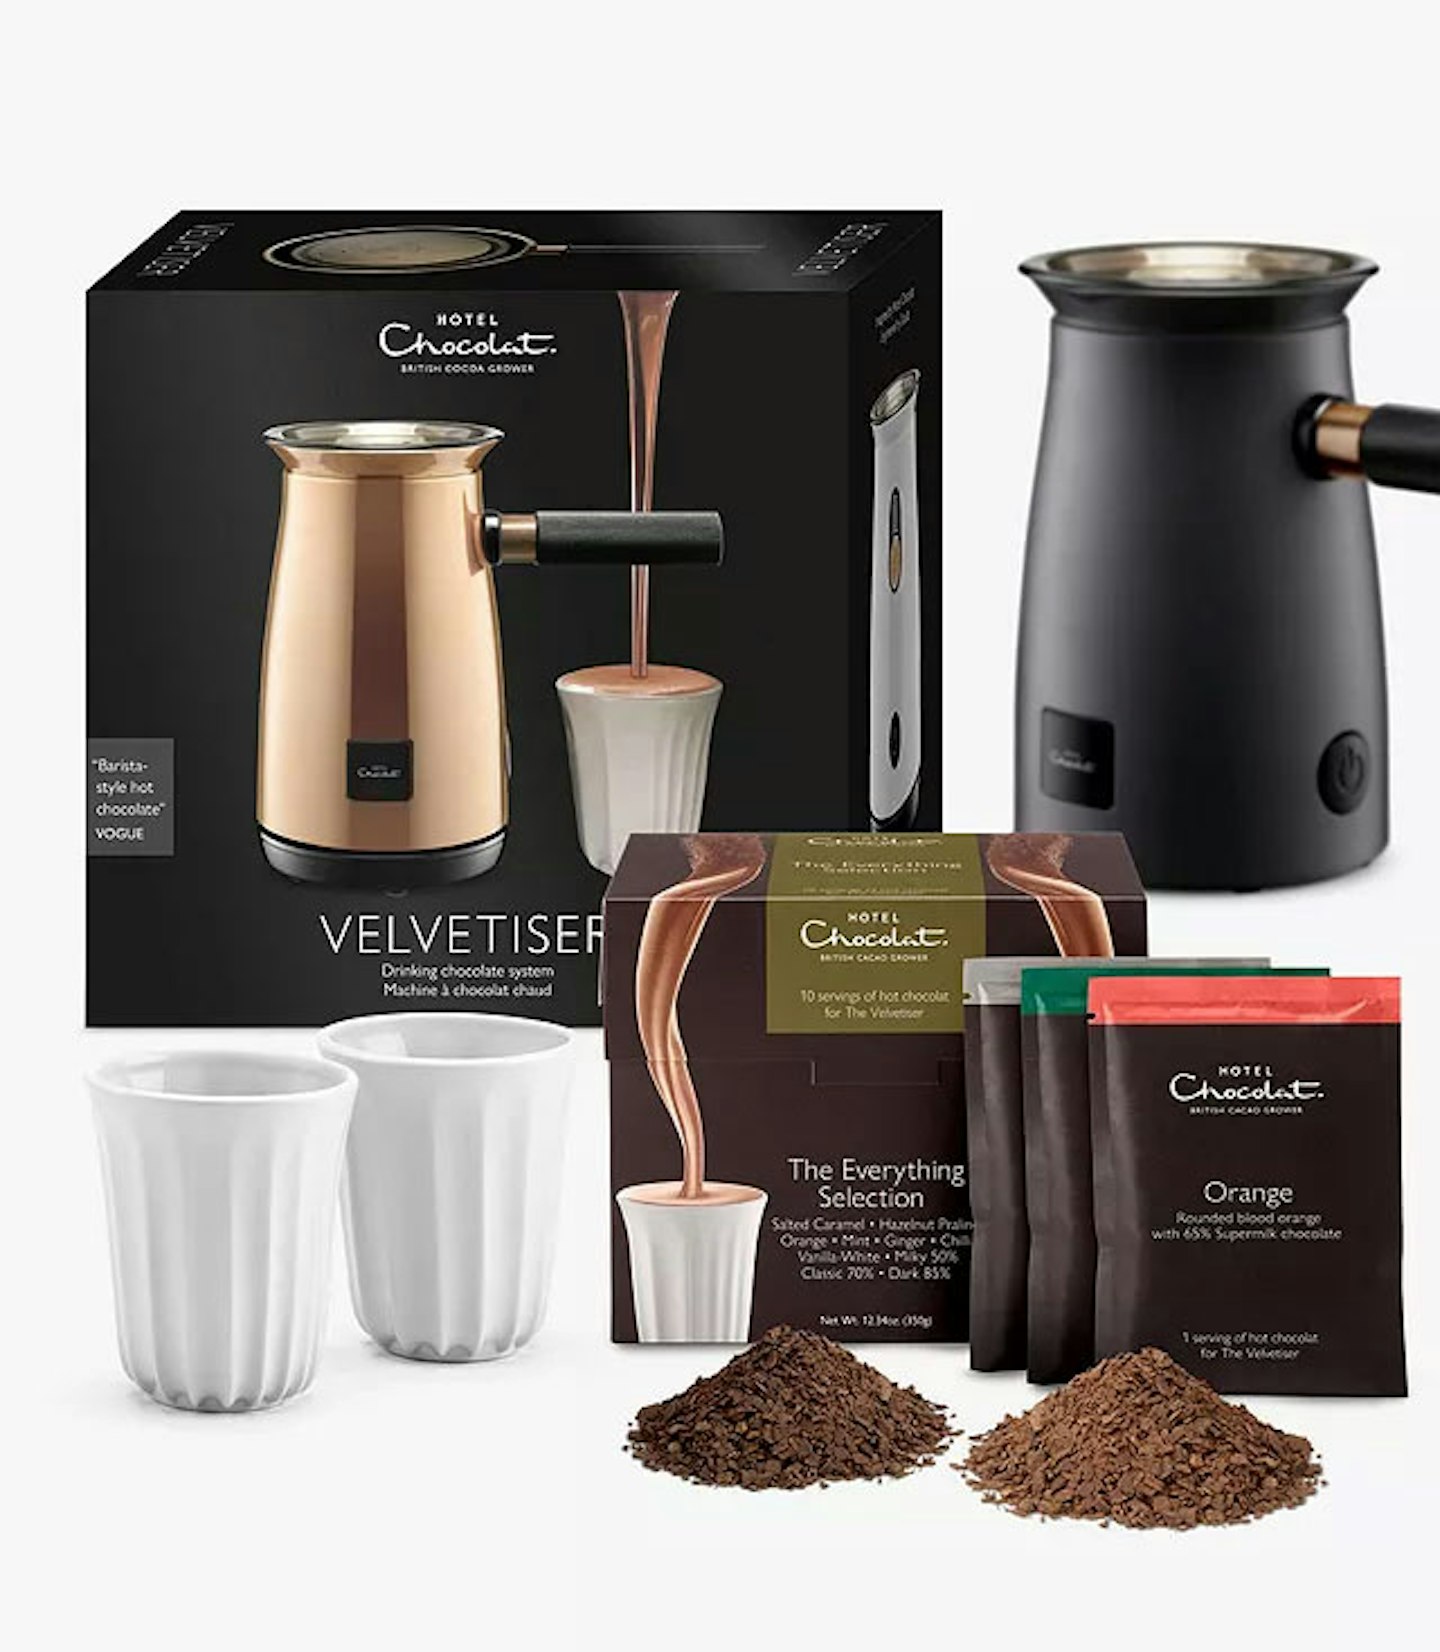 Hotel Chocolat Velvetiser review: is this hot chocolate maker worth £100?